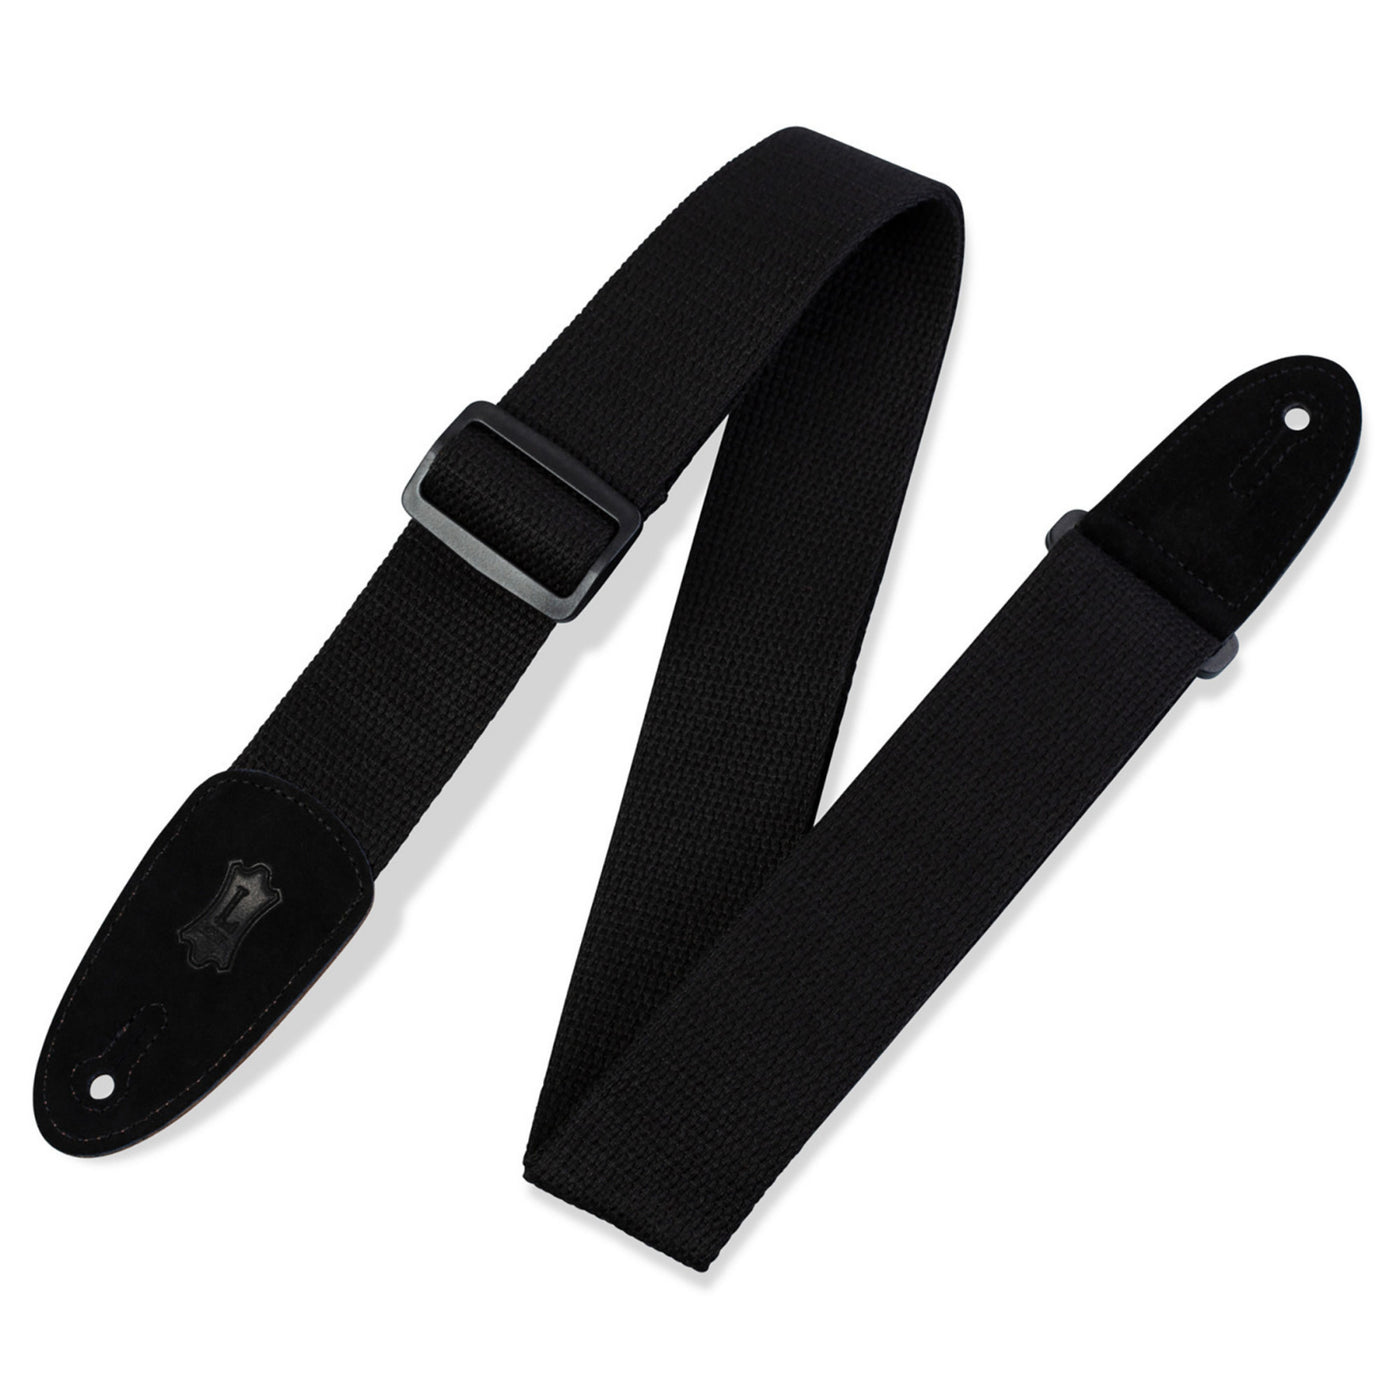 Levy's 2" Cotton Strap in Black